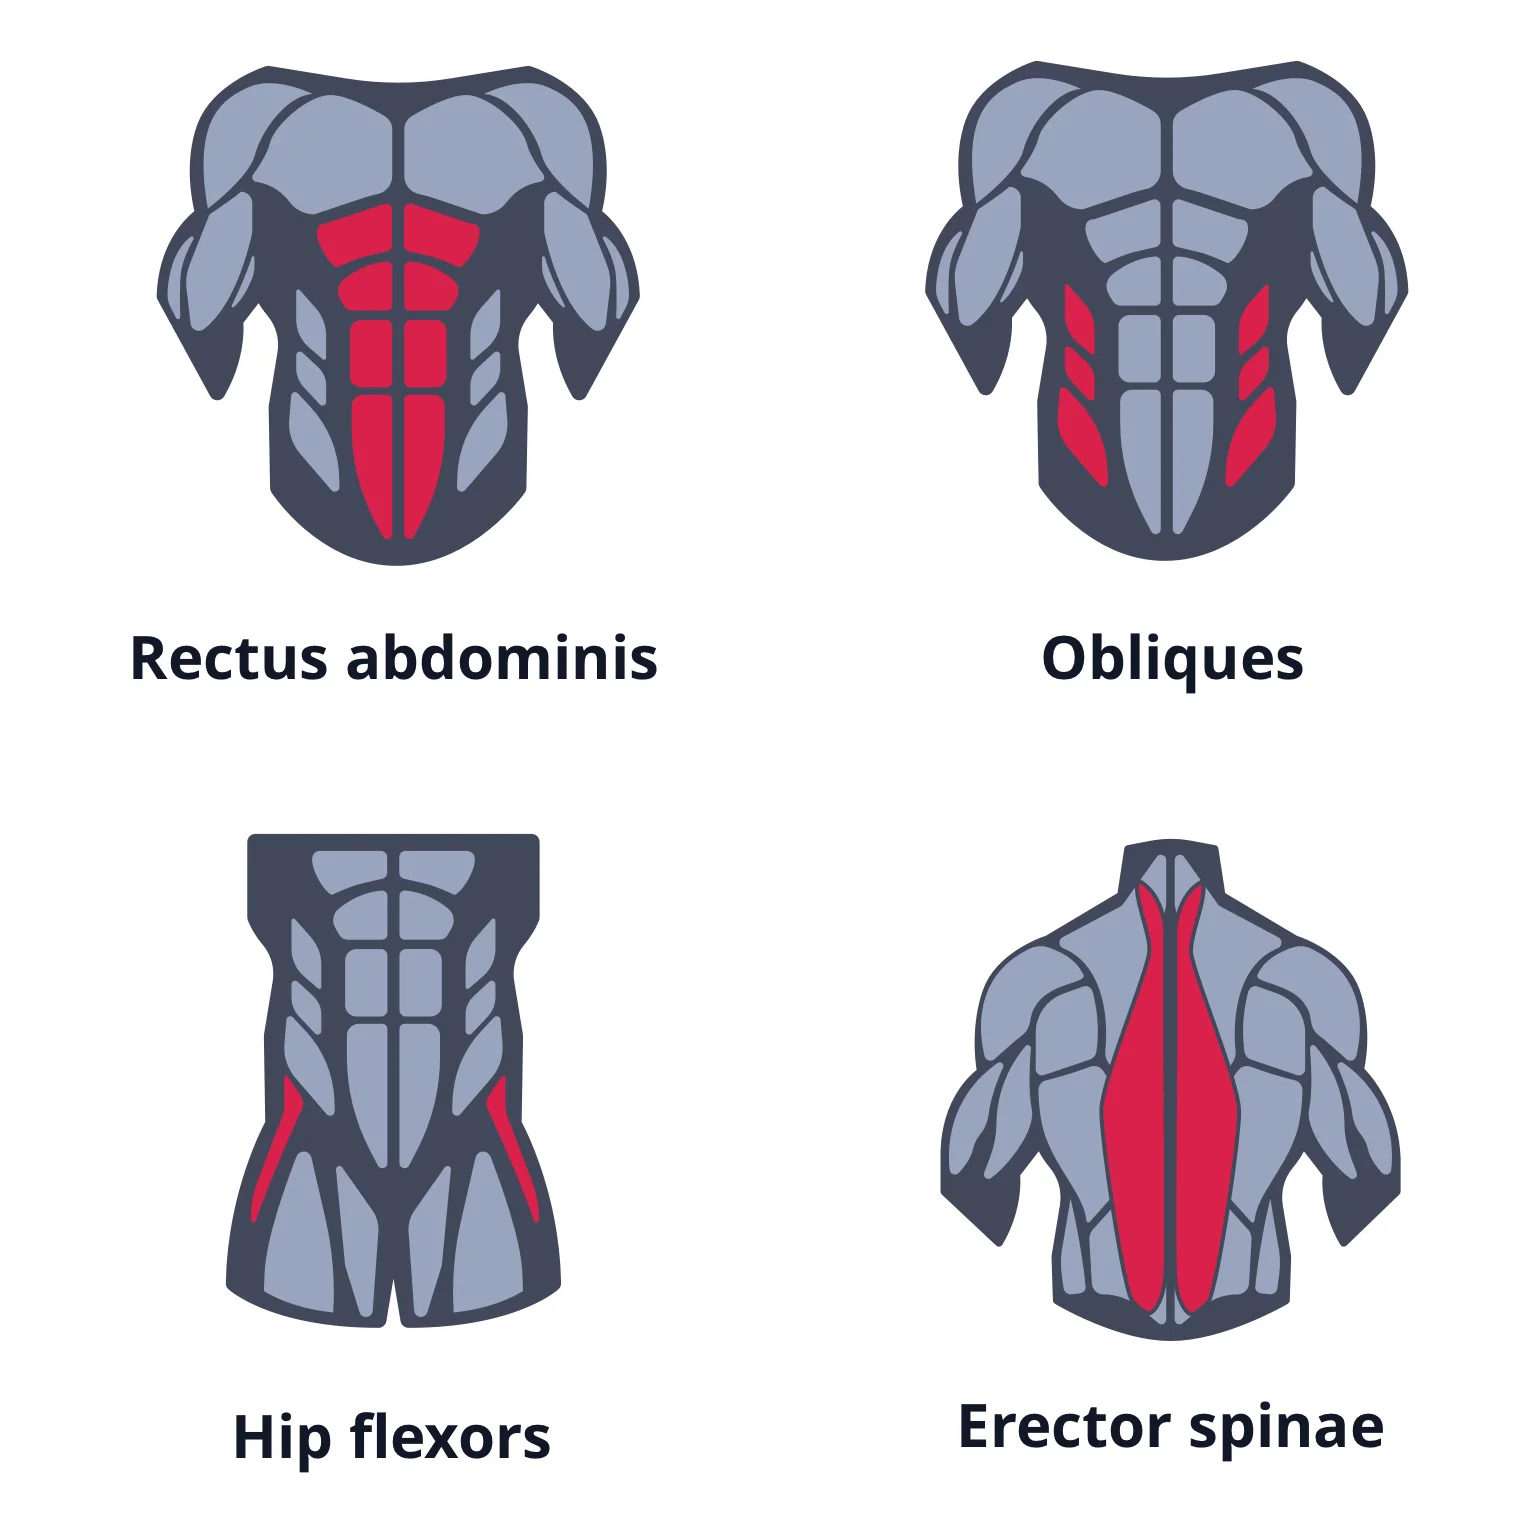 diagram - Showing locations of the rectus abdominis, obliques, hip flexors and erector spinae.